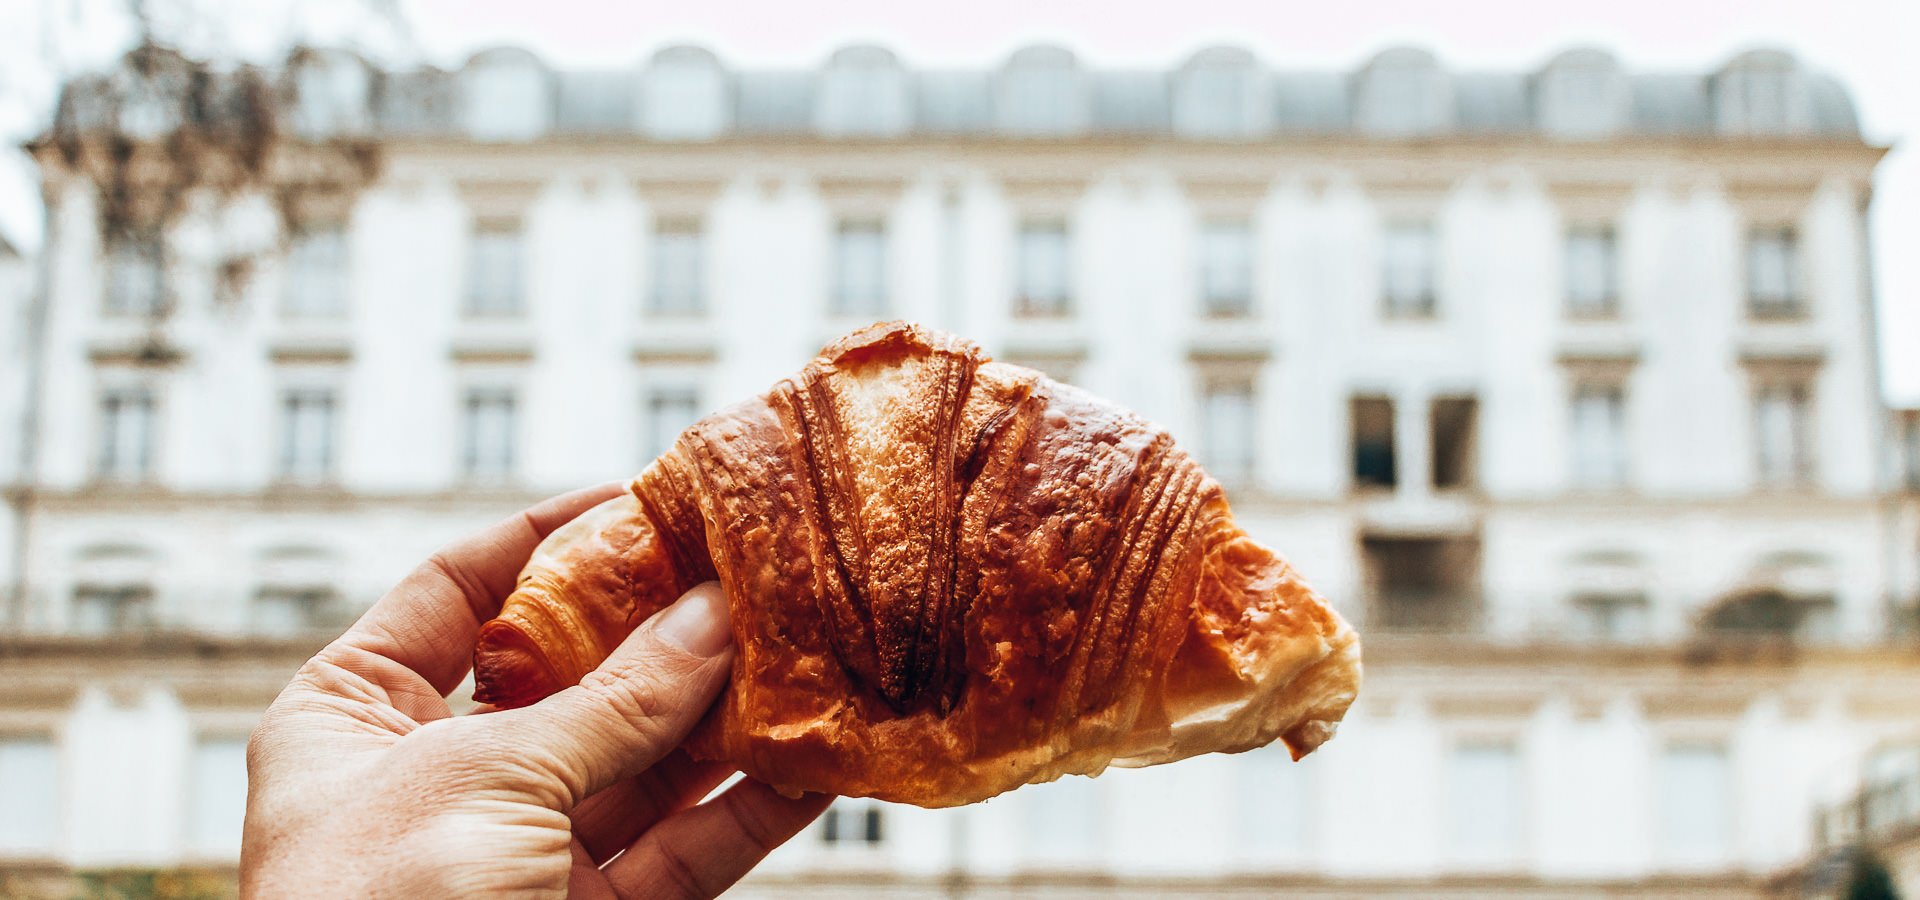 8 Of The Best Bakeries and Pâtisseries In Paris | guide to essaouira morocco 5